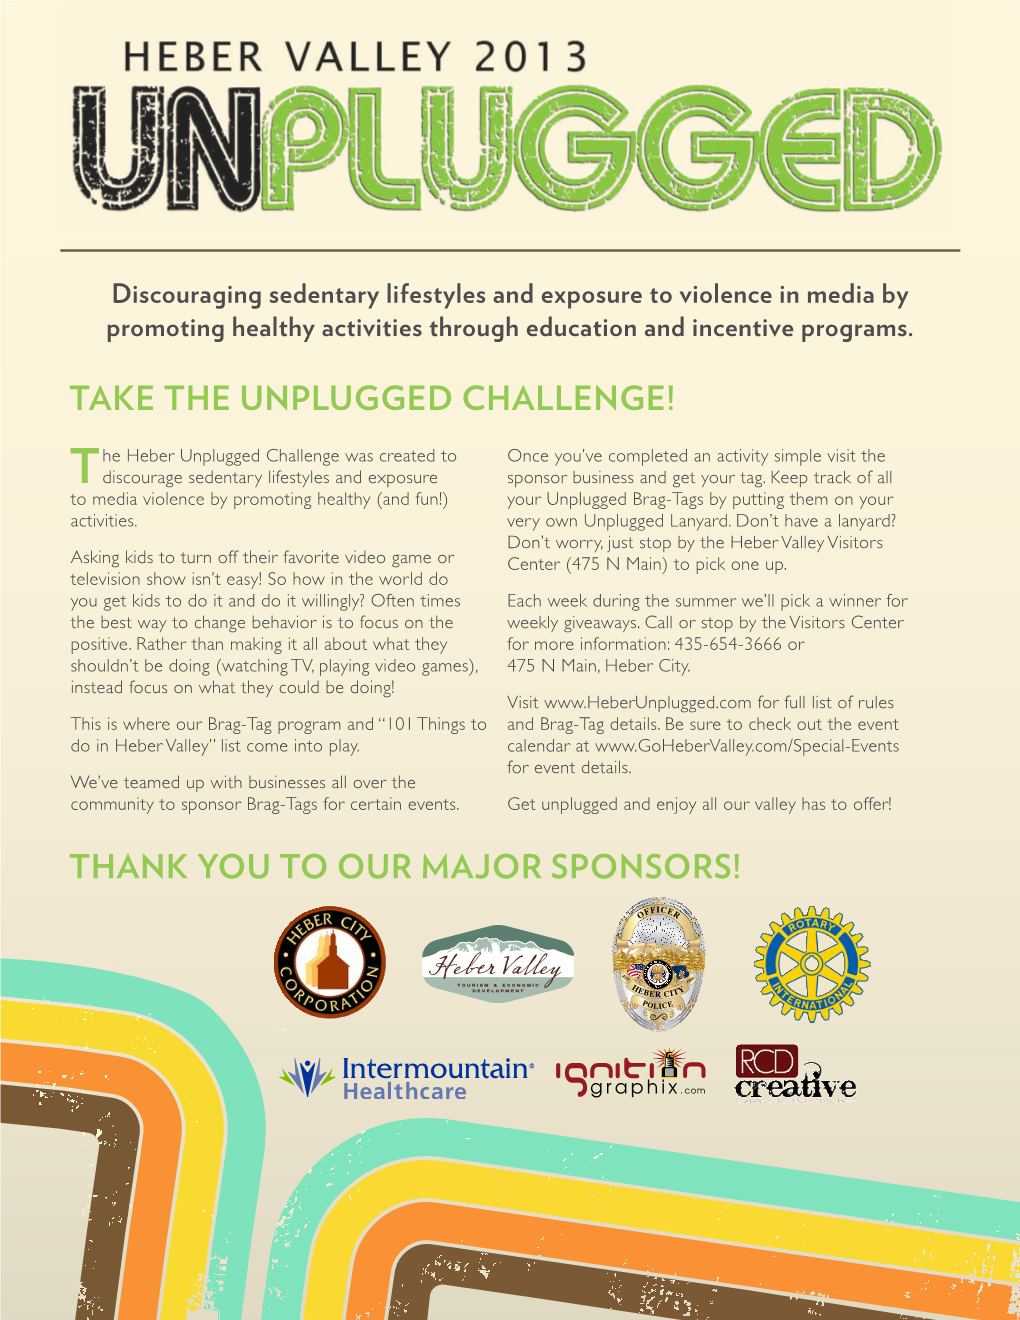 Take the Unplugged Challenge!